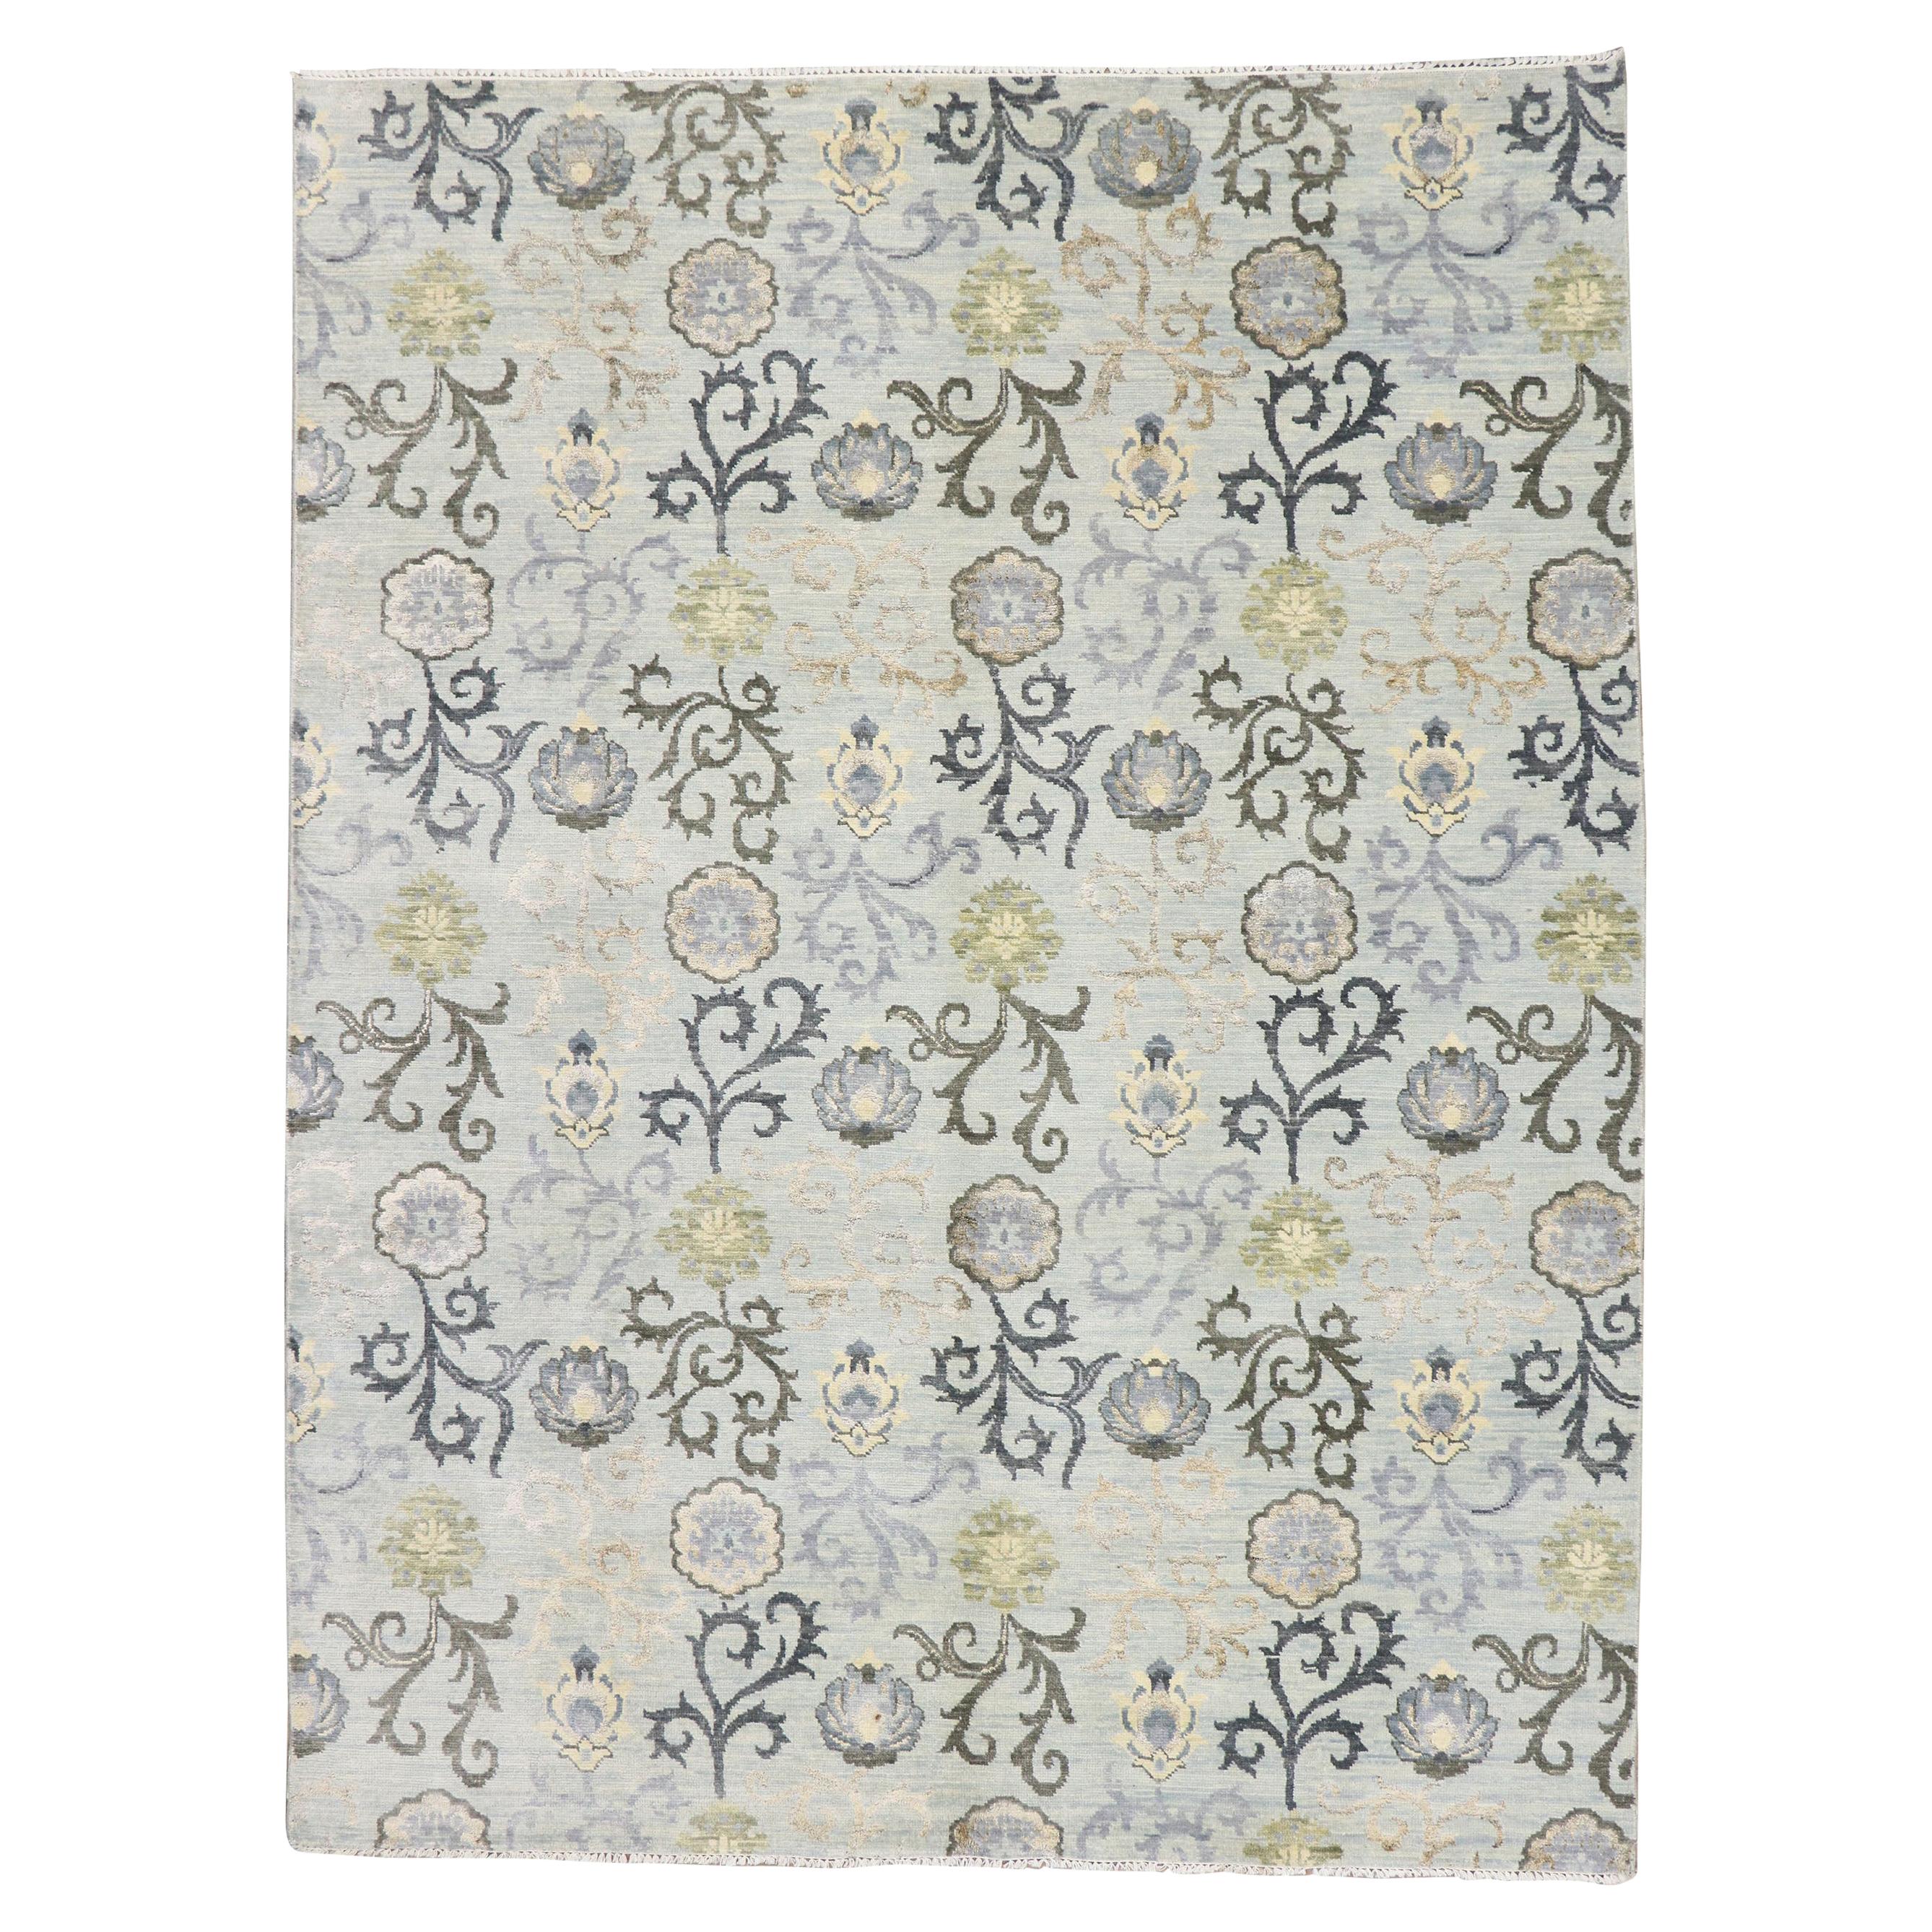 New Transitional Area Rug with Modern Abstract Floral Design 